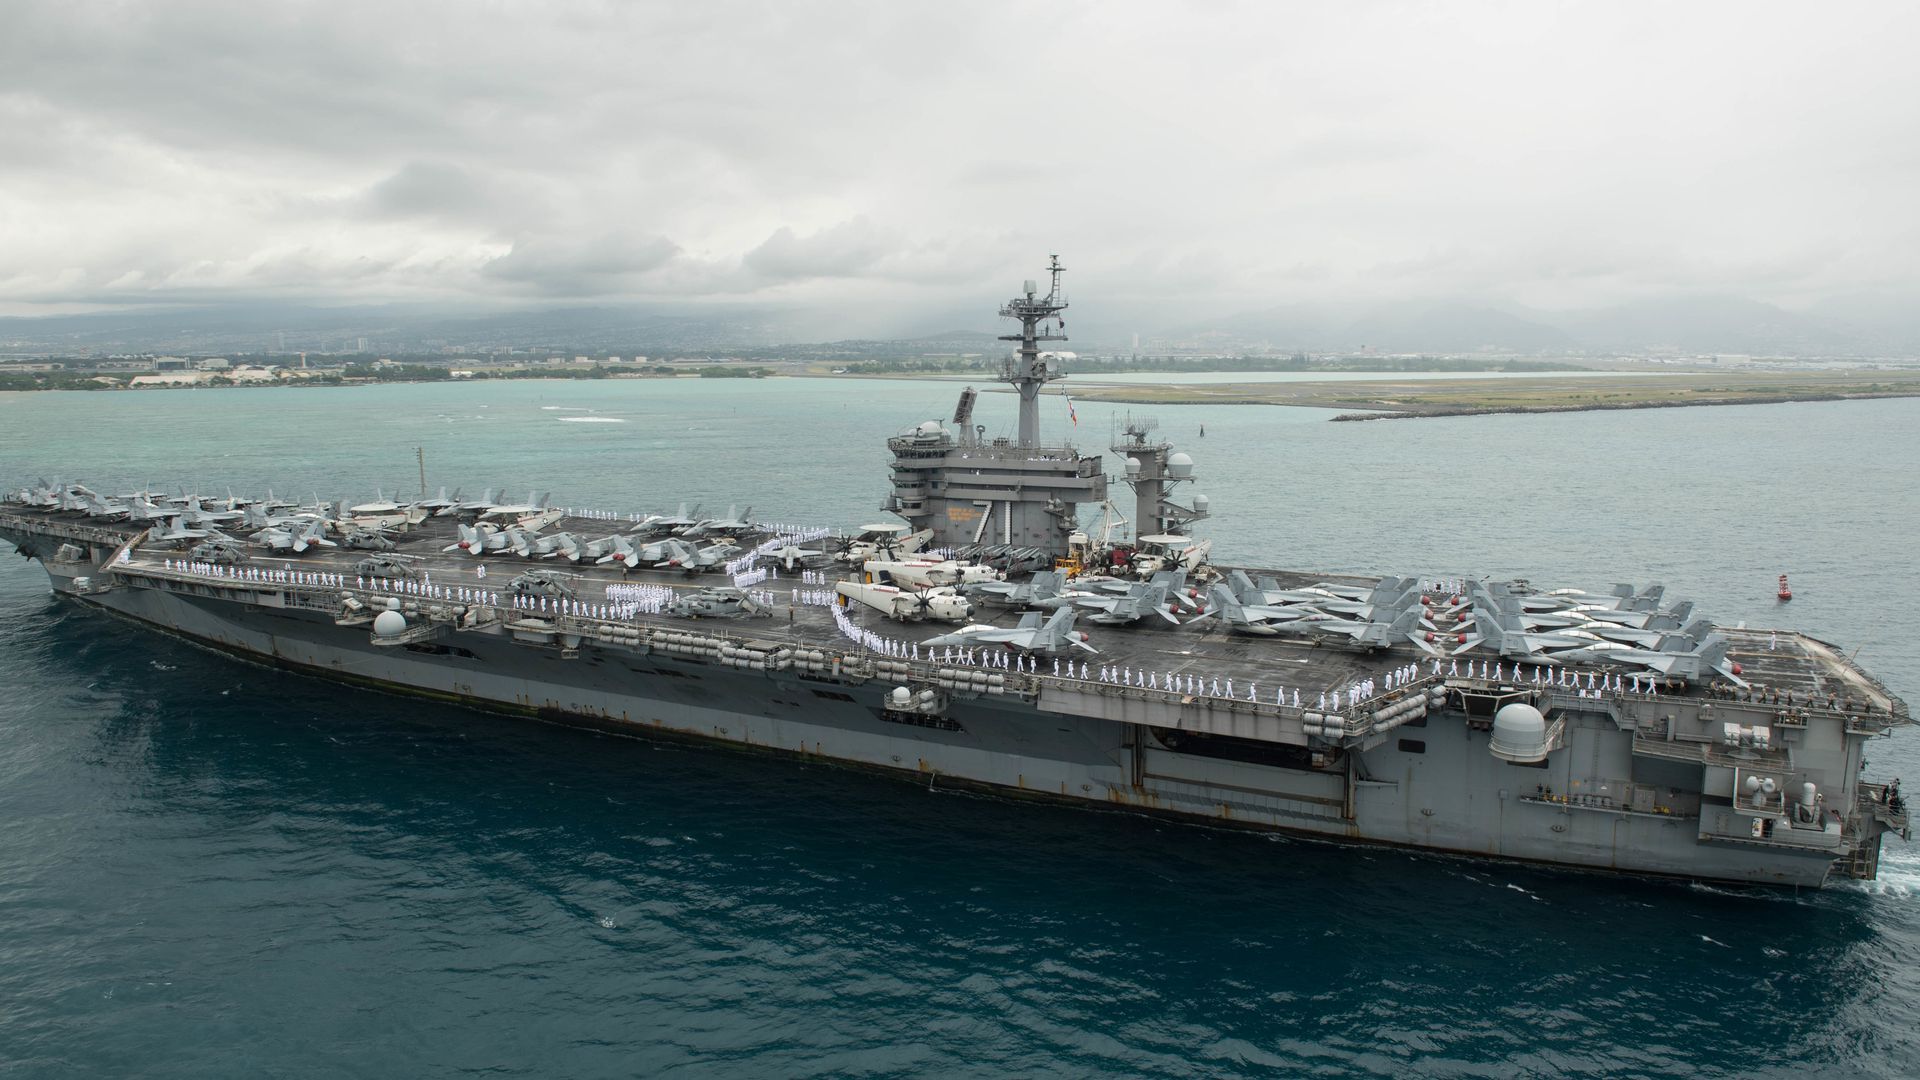 This image shows the USS Theodore Roosevelt on the ocean 